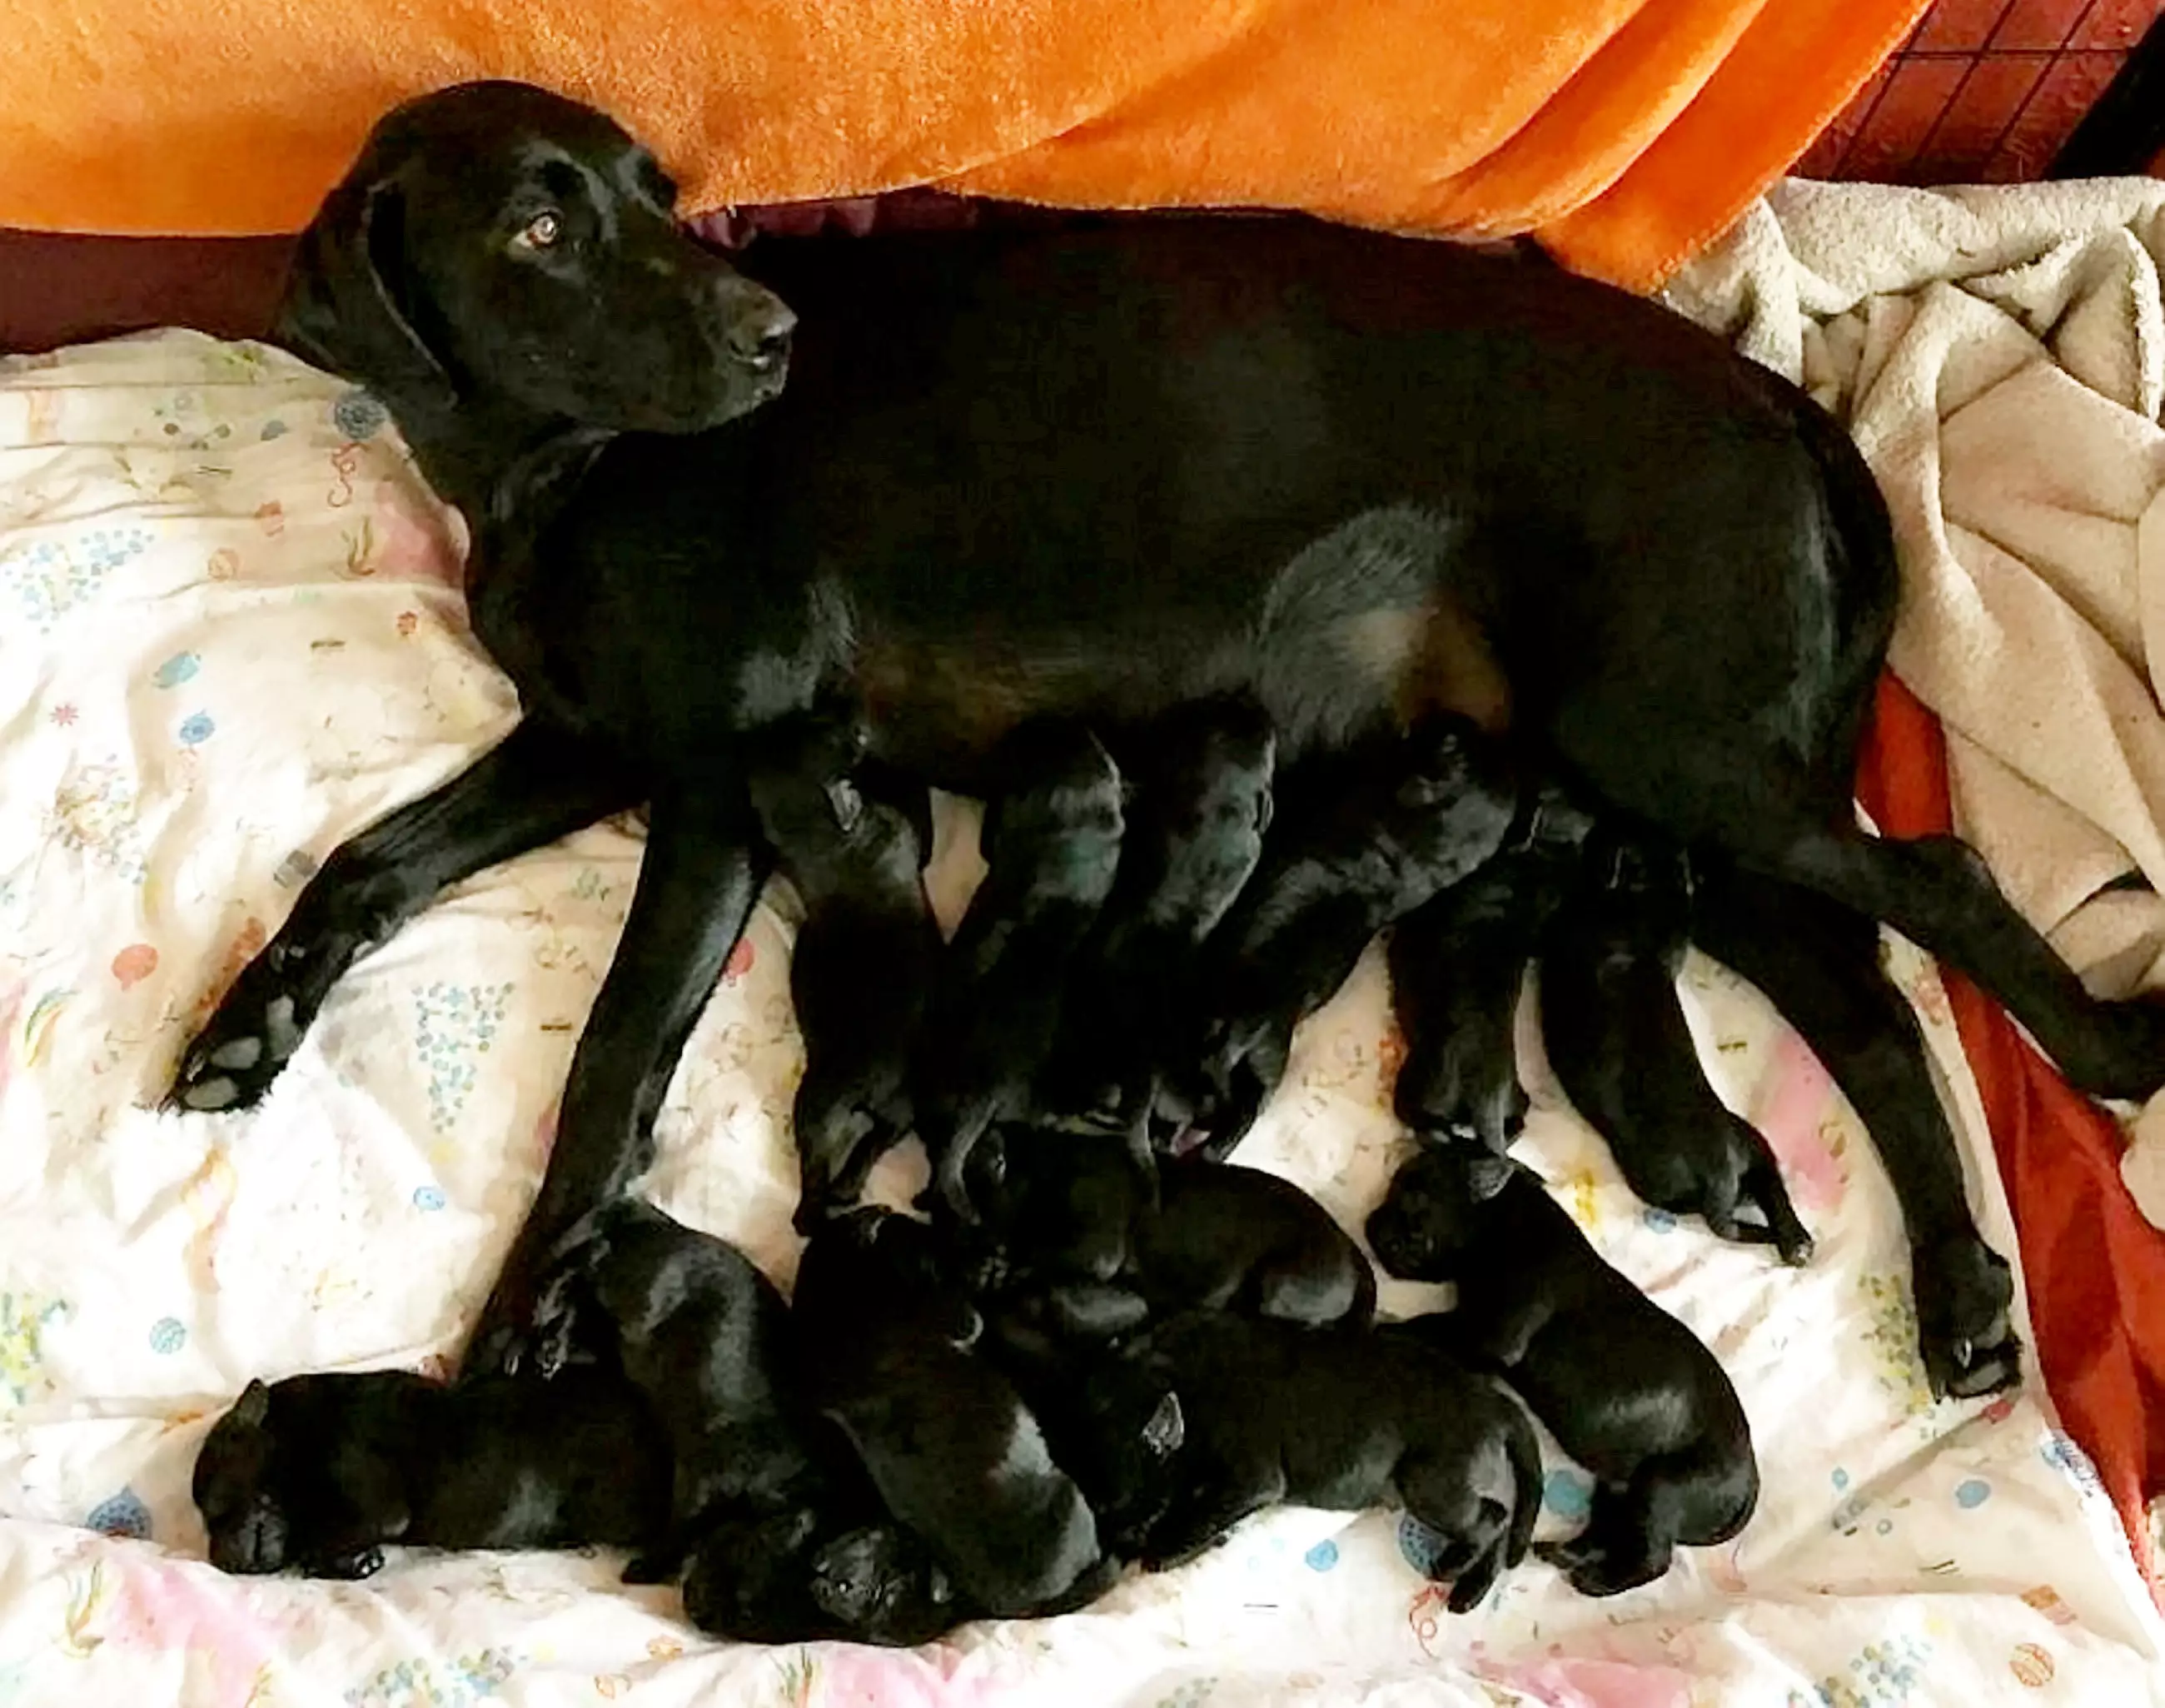 Beau was only supposed to have six pups (